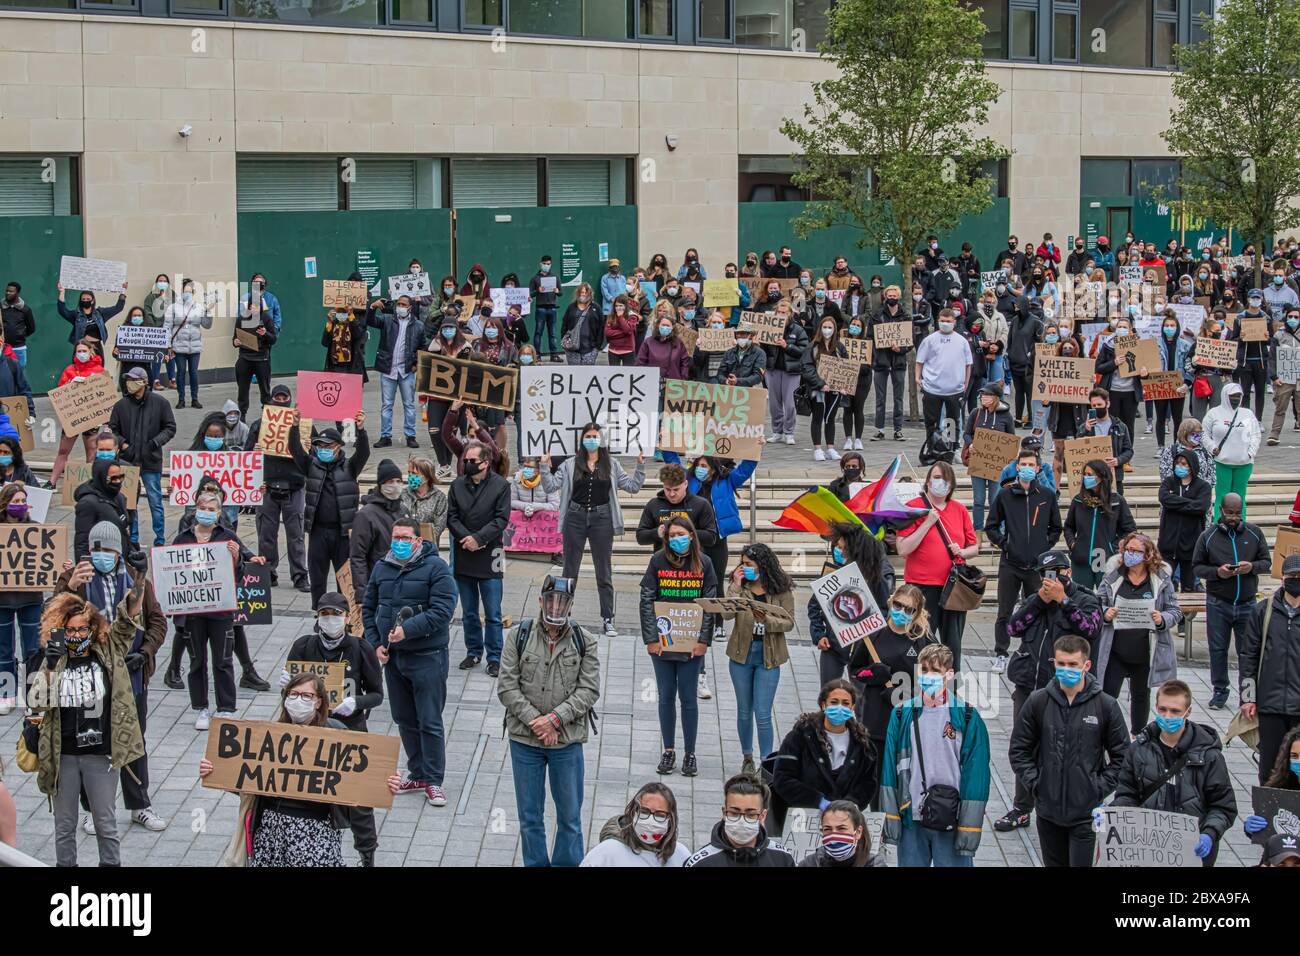 Swindon black lives matter protest, peaceful protest at Regent circus June 2020 Stock Photo